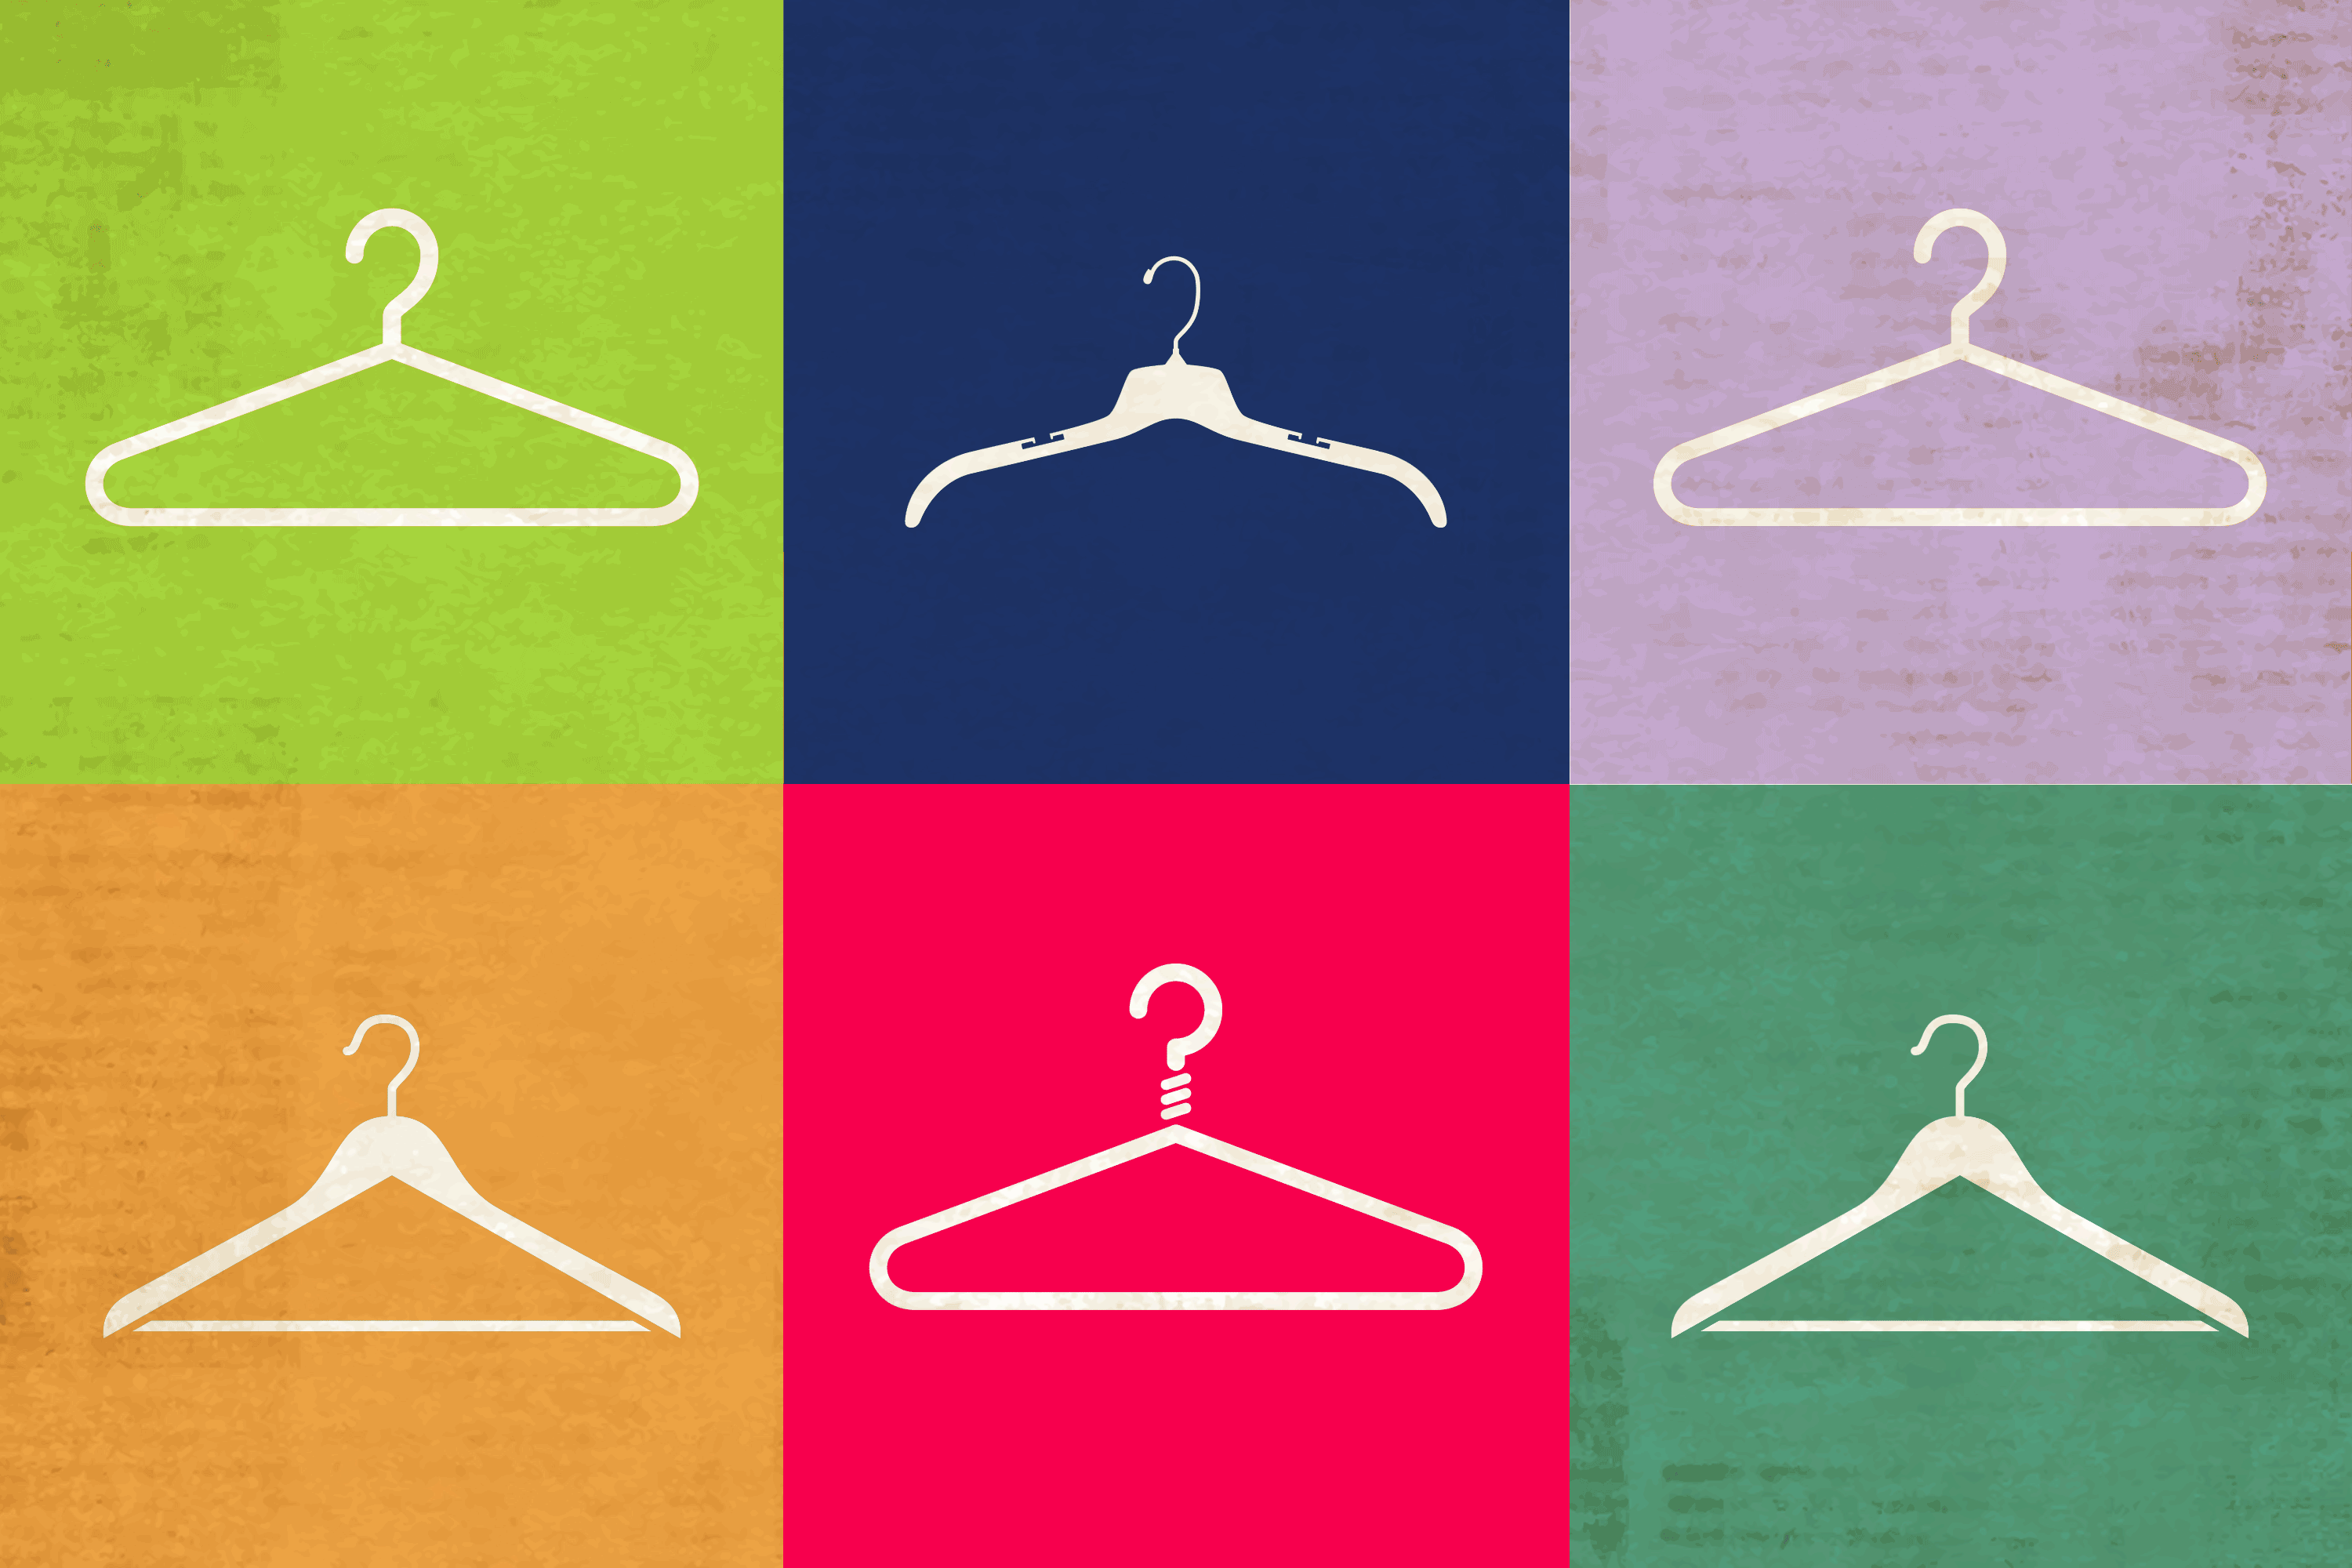 An illustration showing different shapes of clothes hangers on flashing colored squares